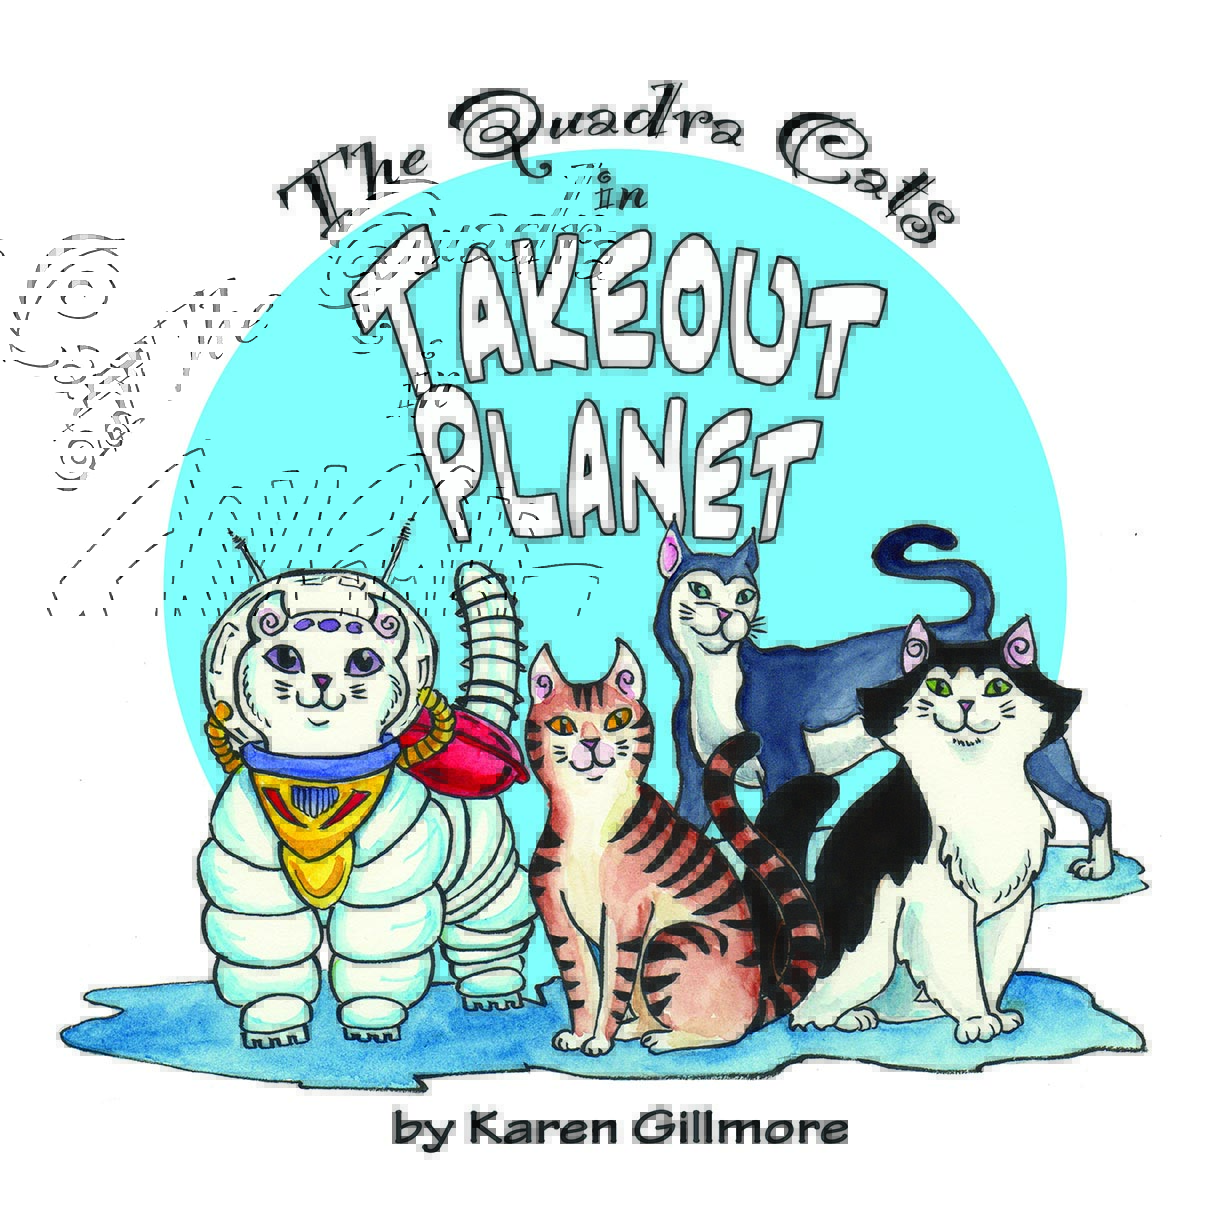 The cover of Takeout Planet, the first book in the Quadra Cats series